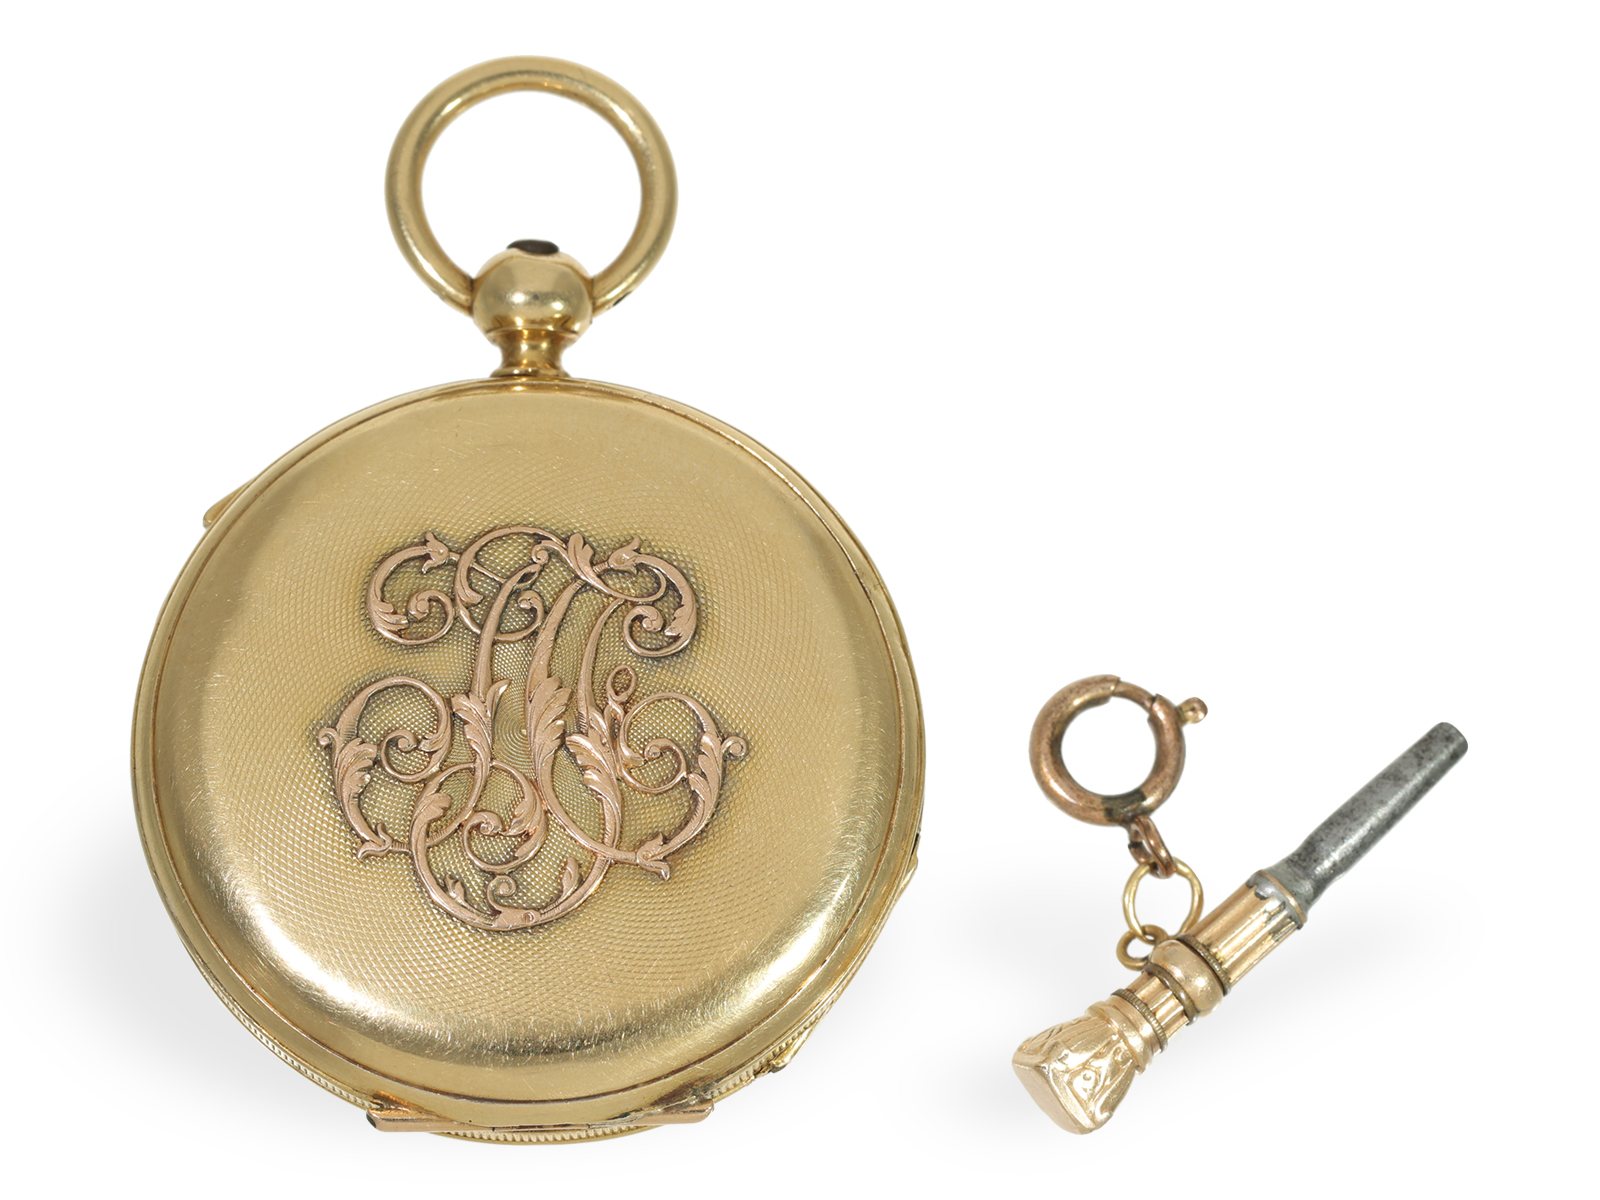 Pocket watch: very rare ladies' pocket watch with repeater, Jeannot Droz a Besancon ca. 1850 - Image 2 of 7